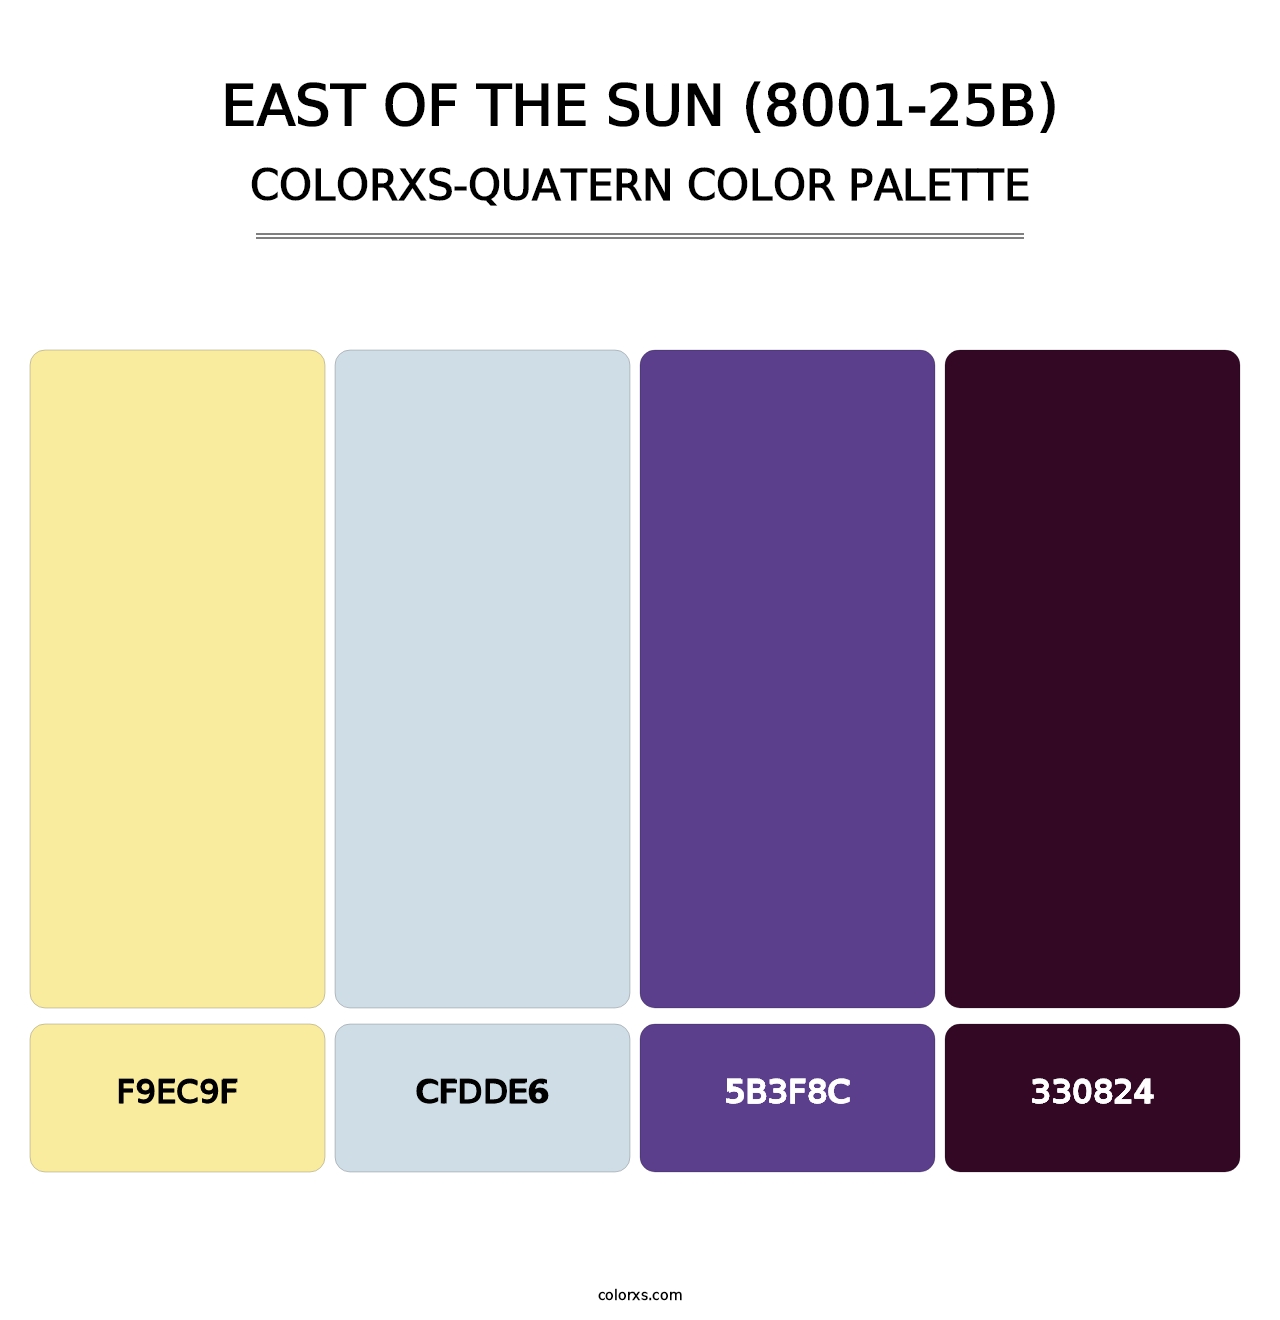 East of the Sun (8001-25B) - Colorxs Quatern Palette